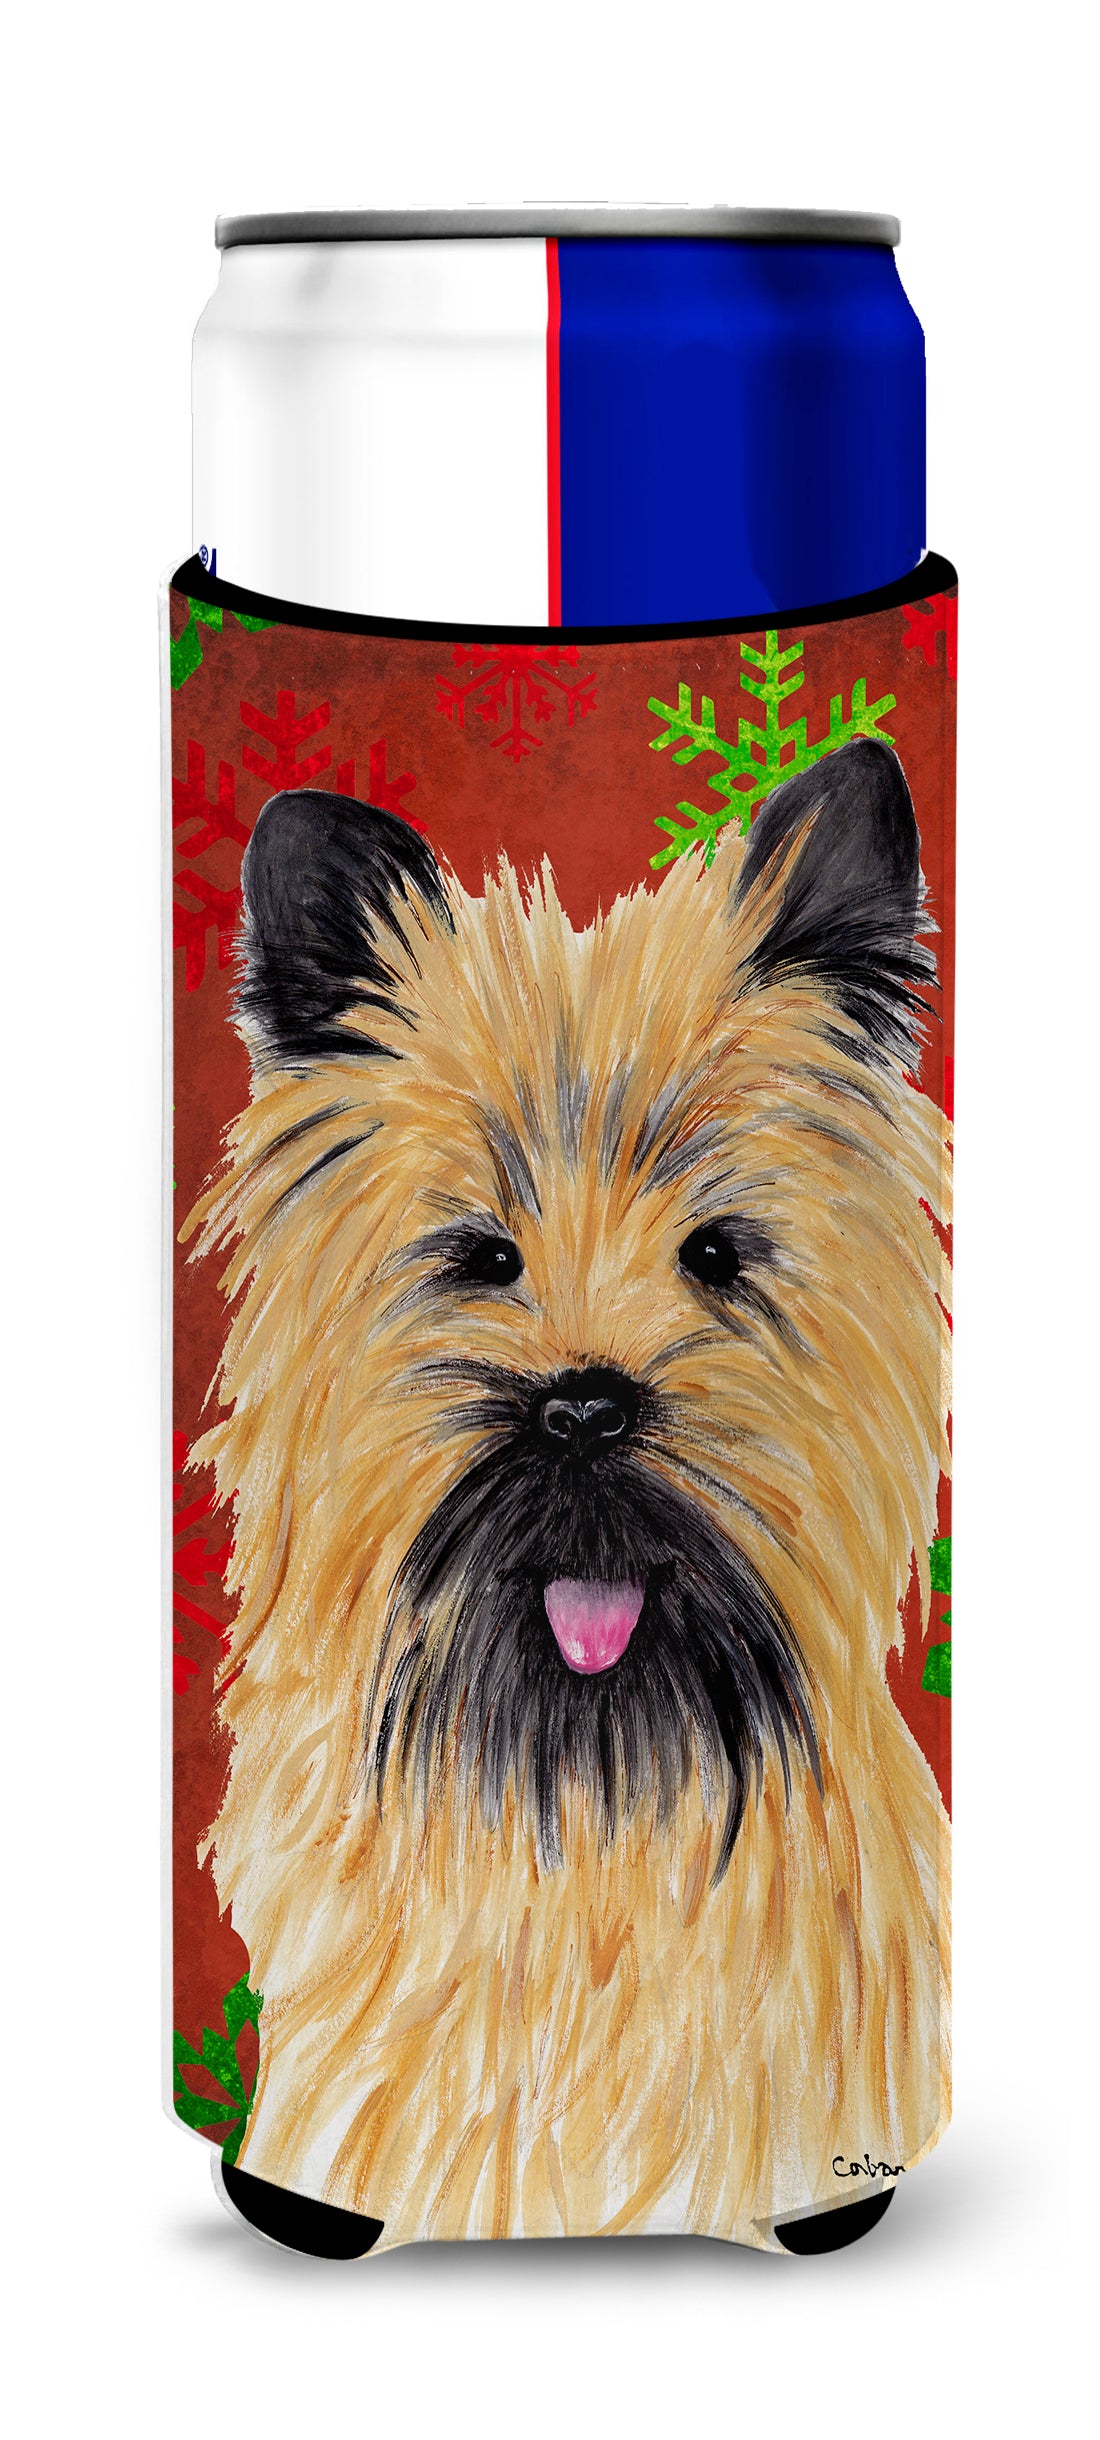 Cairn Terrier Red and Green Snowflakes Holiday Christmas Ultra Beverage Insulators for slim cans SC9415MUK